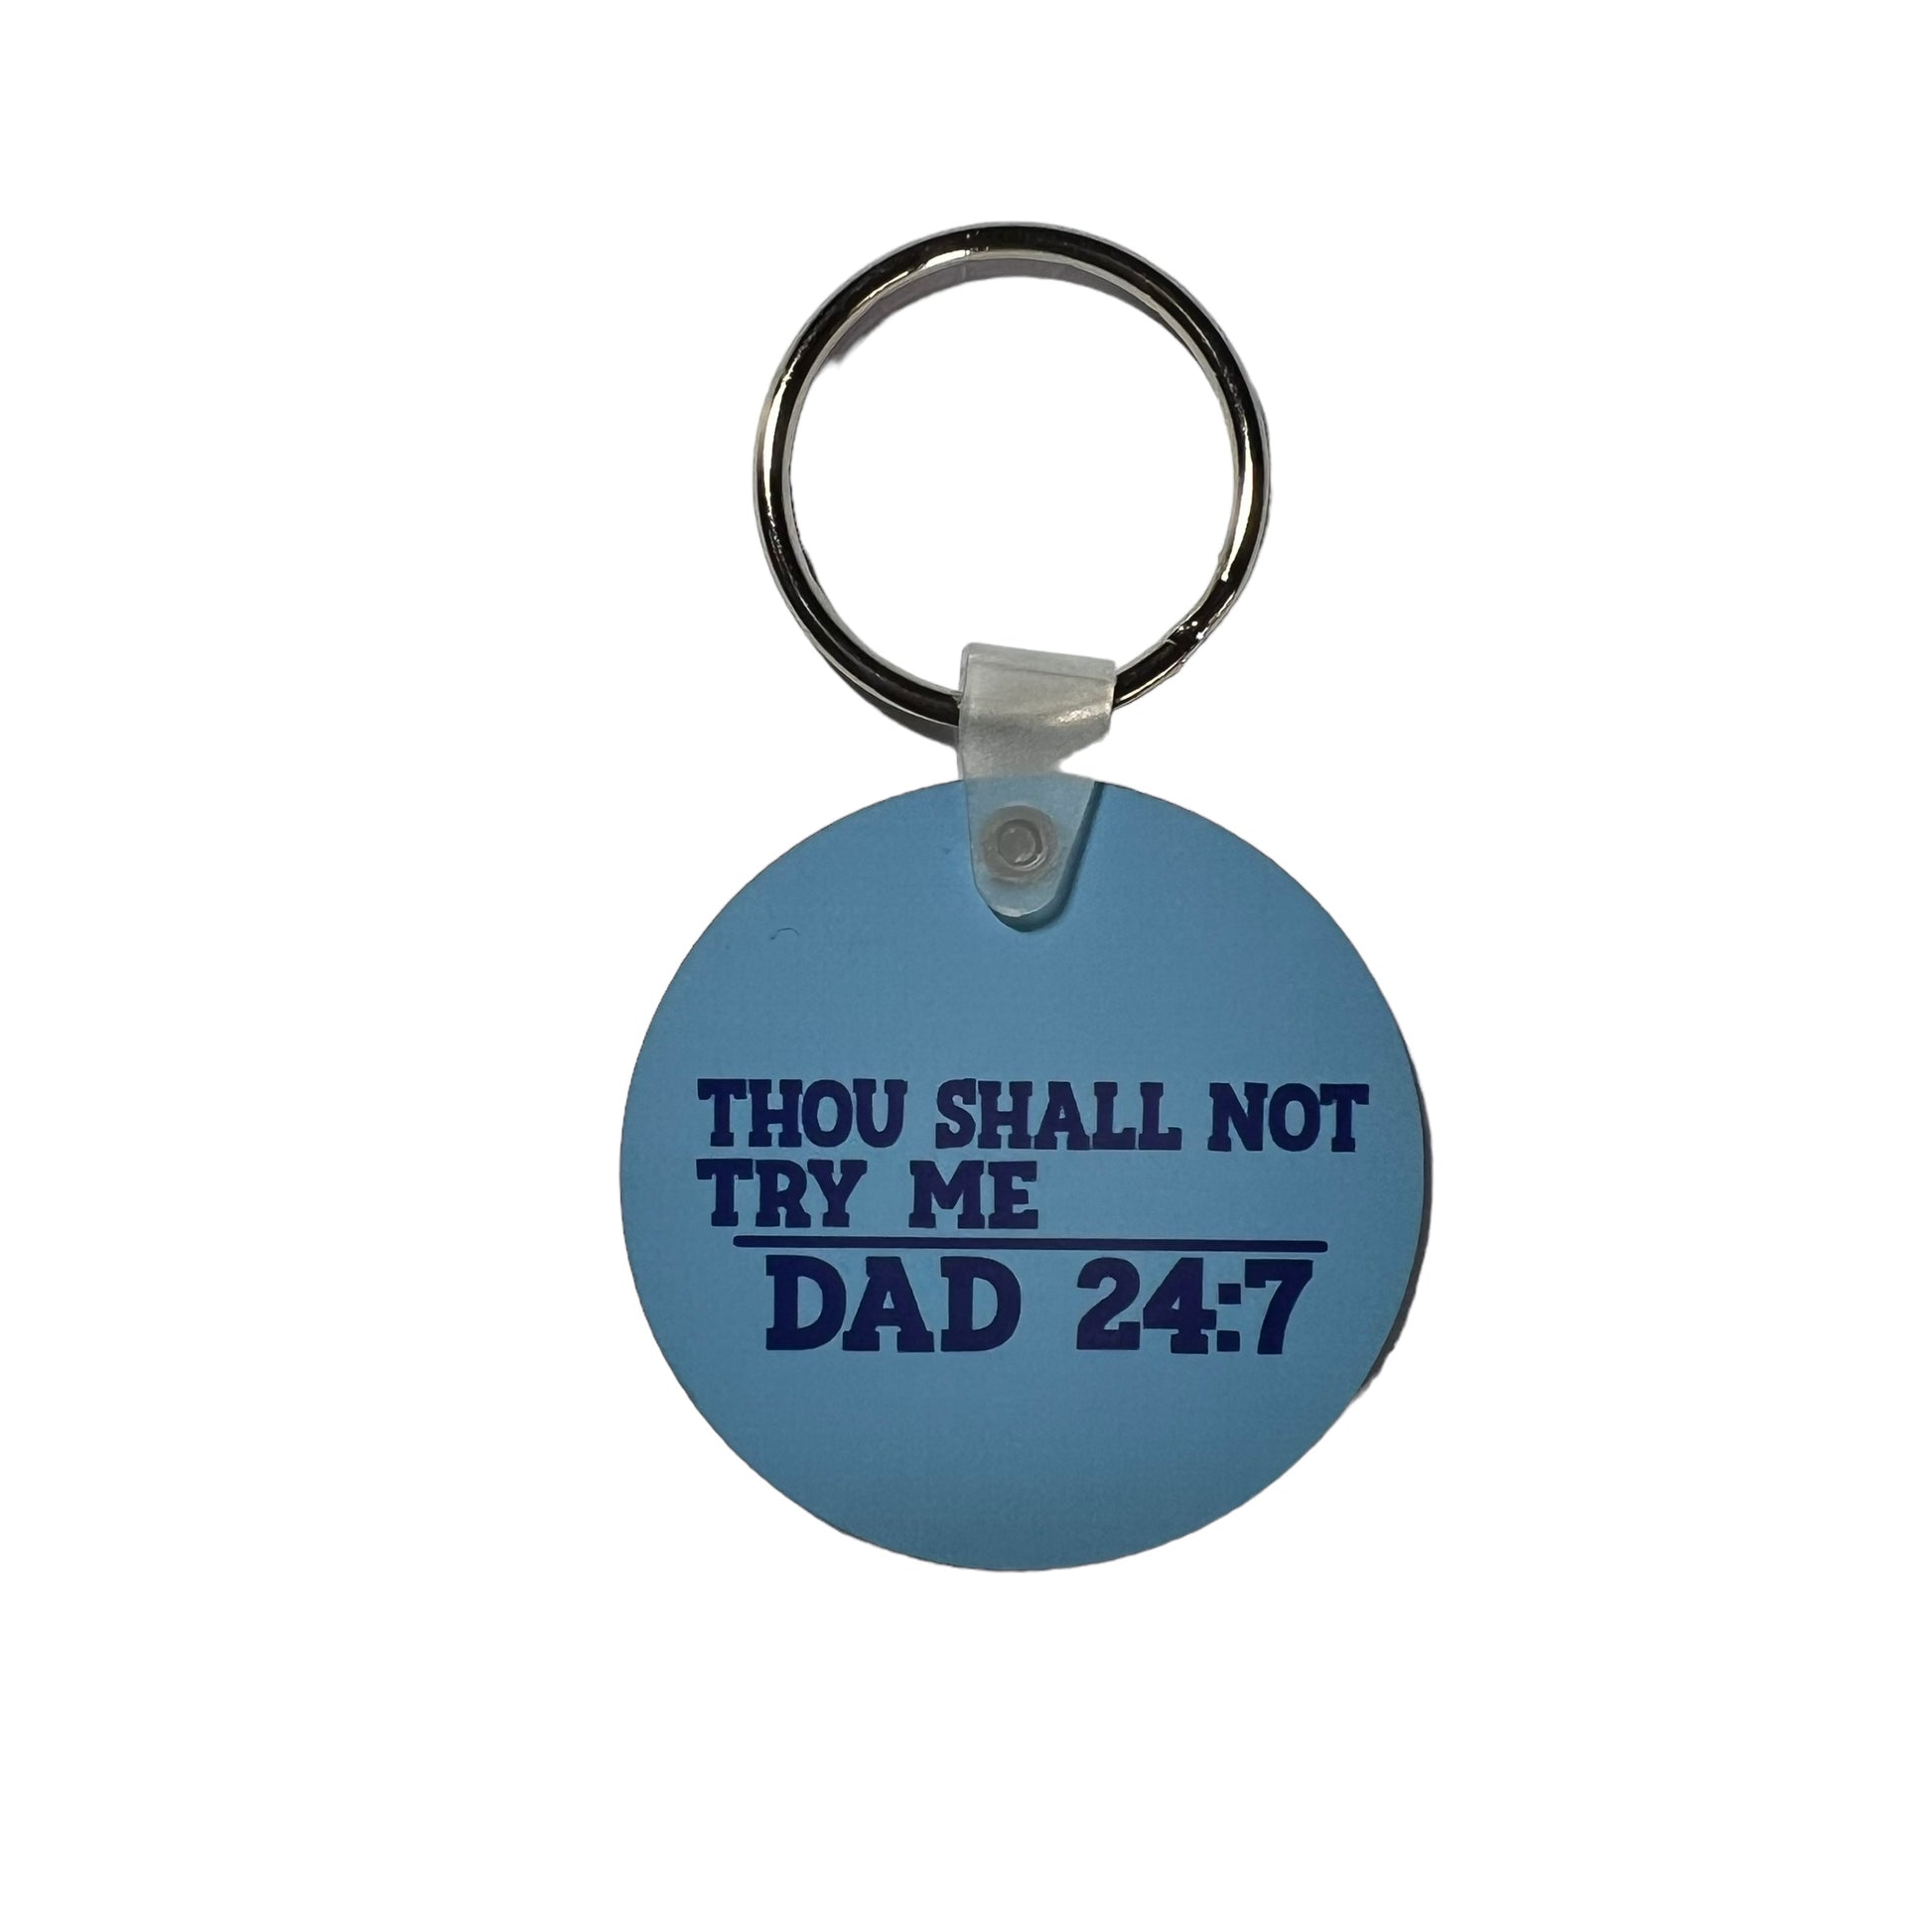 JenDore Cool Blue Handcrafted Dad Fixer of Things Round Keychain